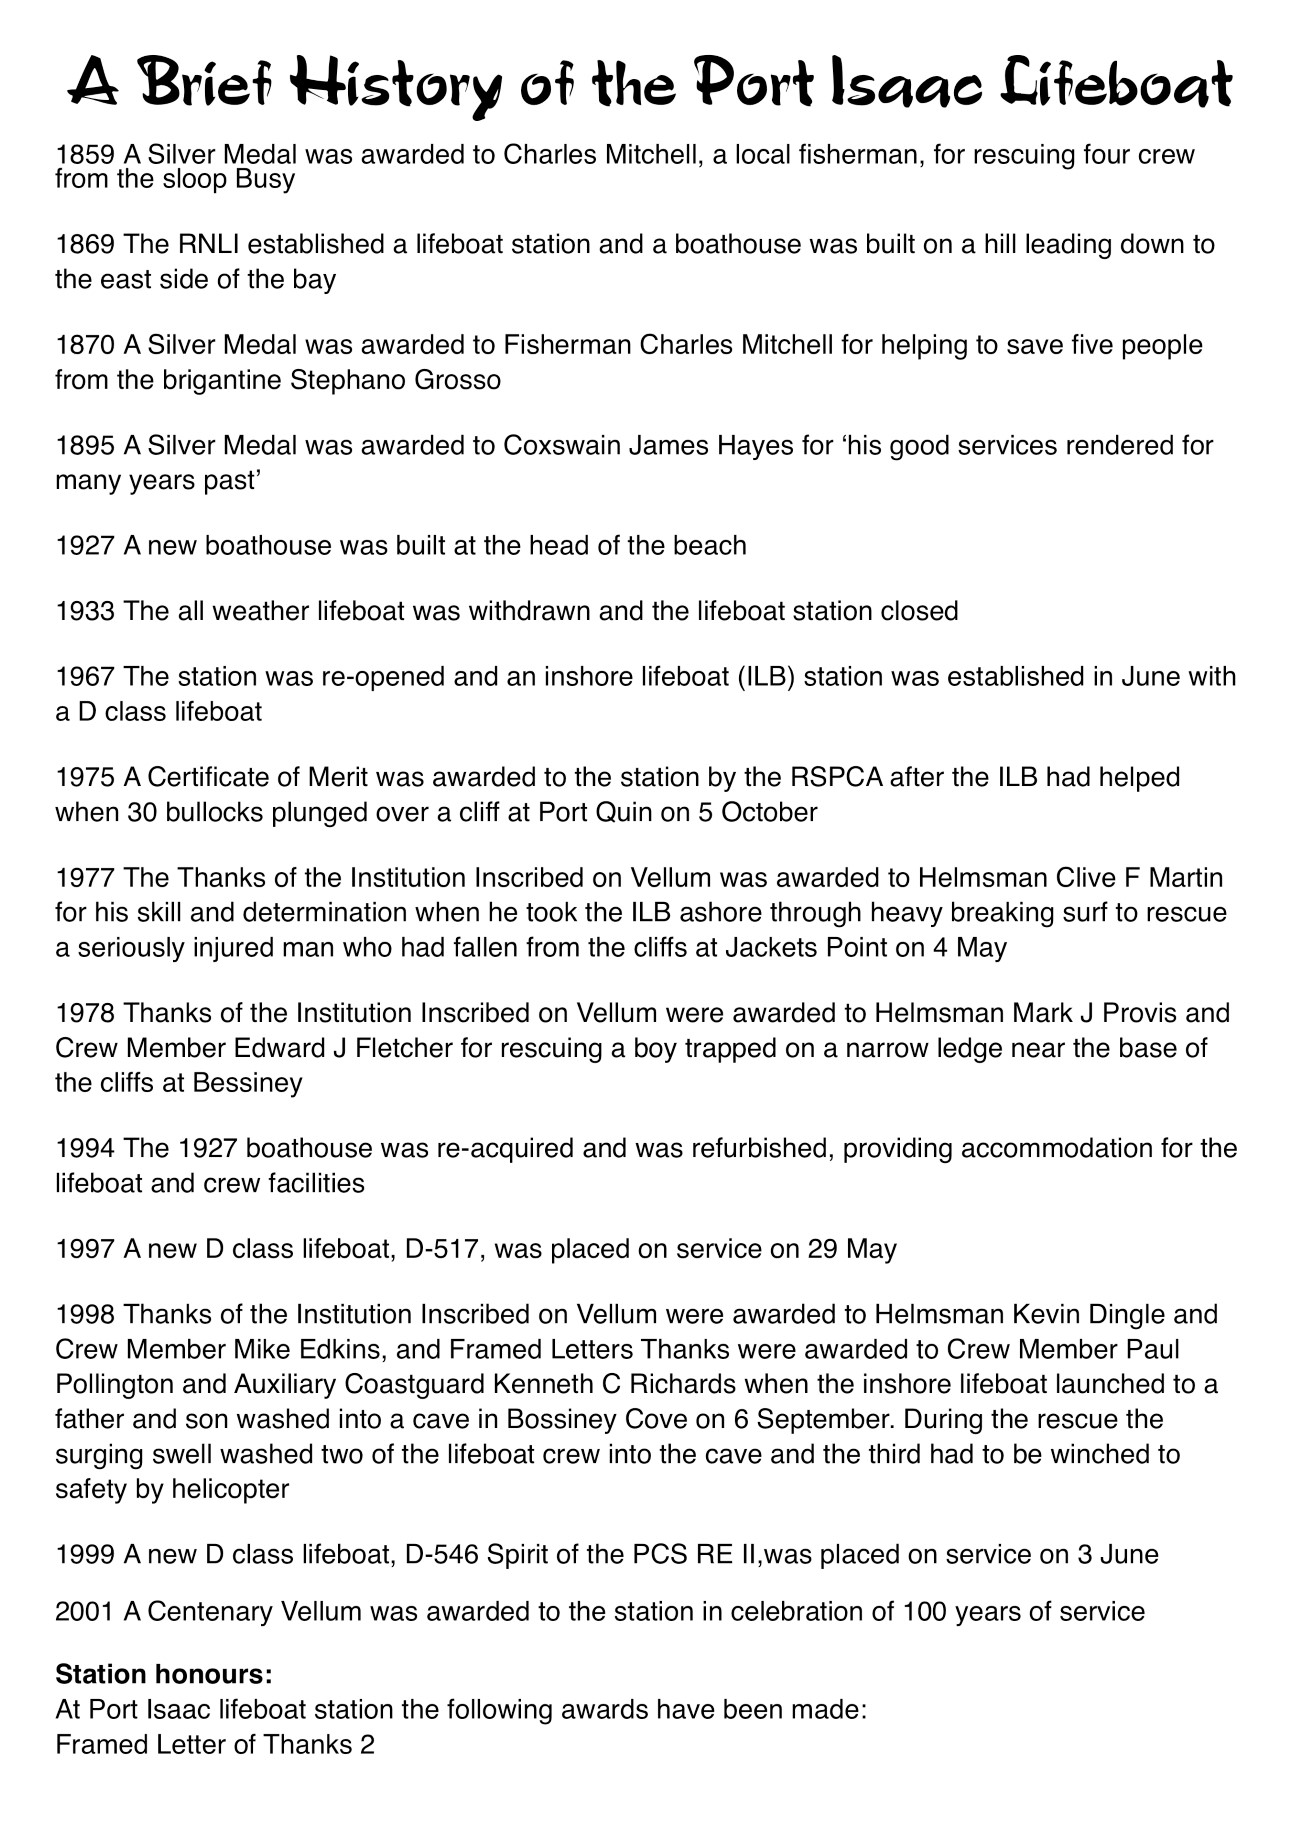 A Brief History of the Port Isaac Lifeboat